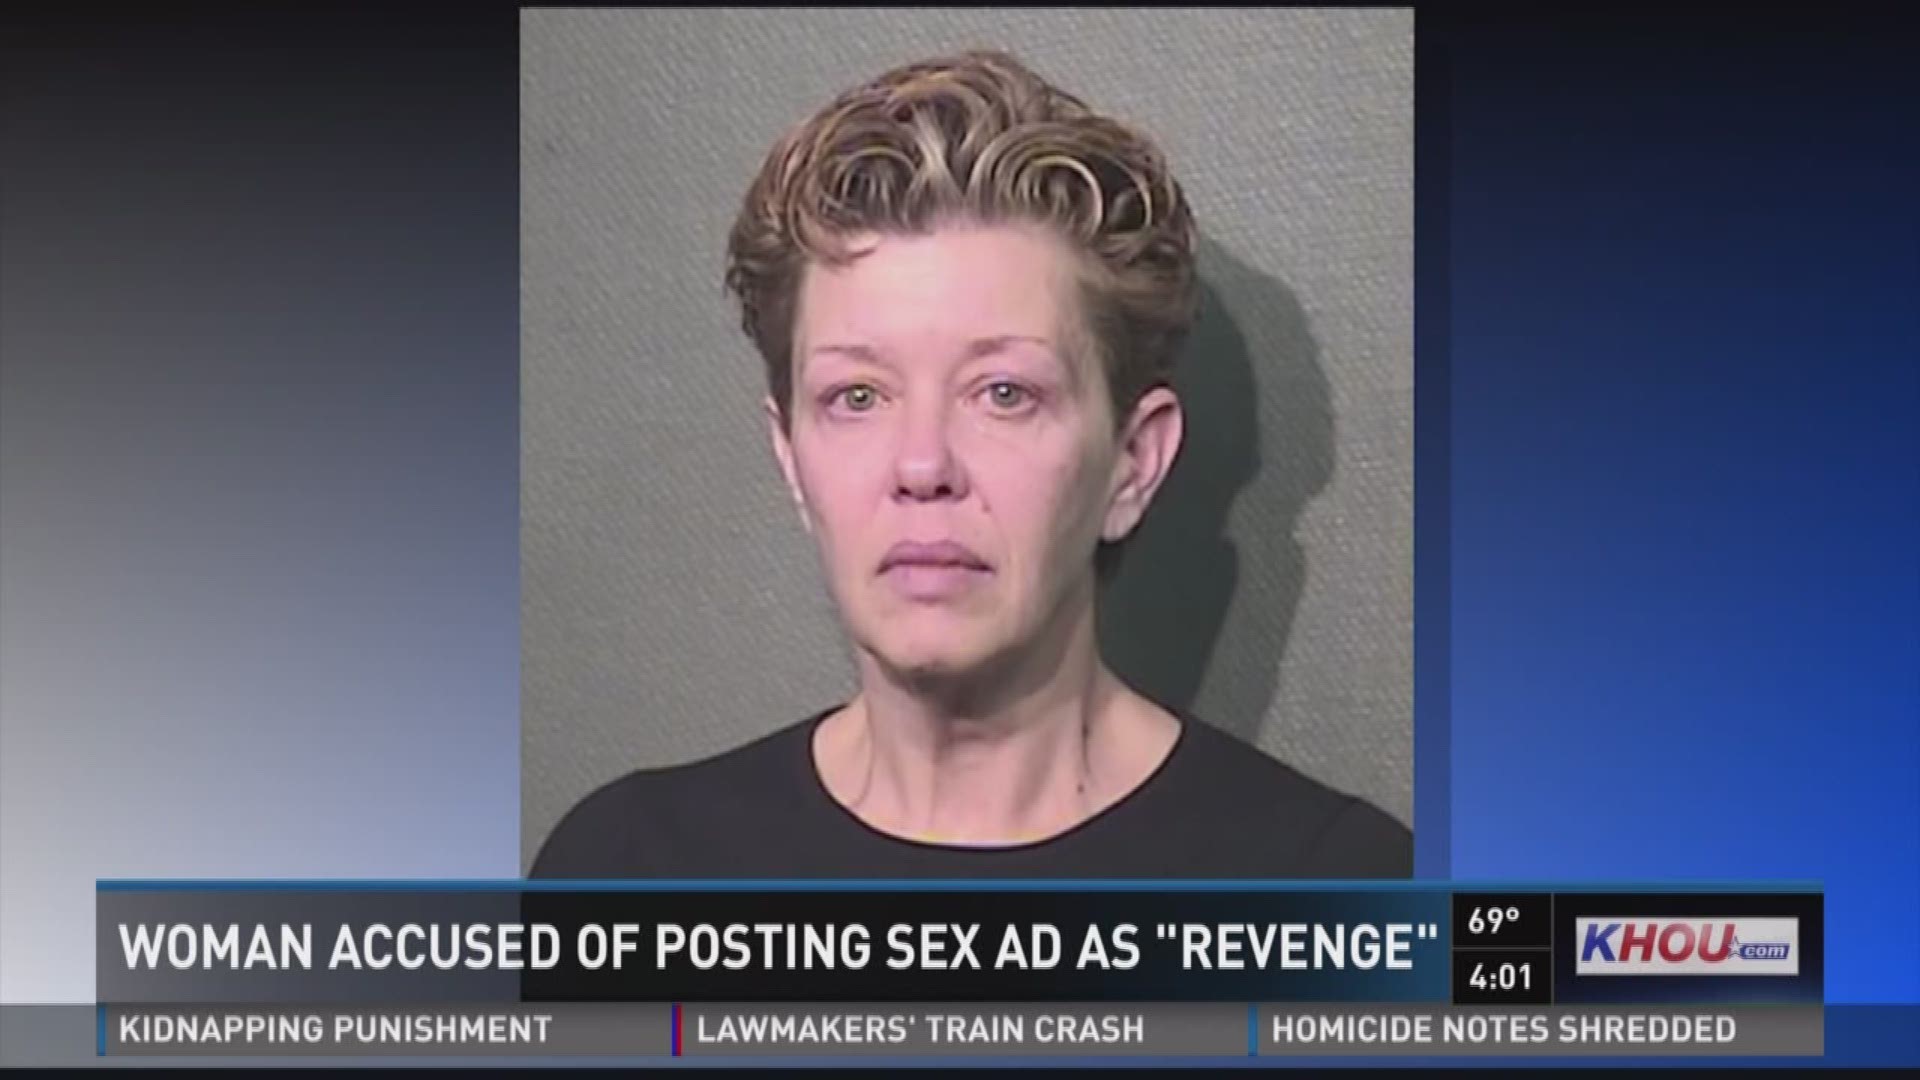 Woman accused of posting sex ad as revenge khou image photo